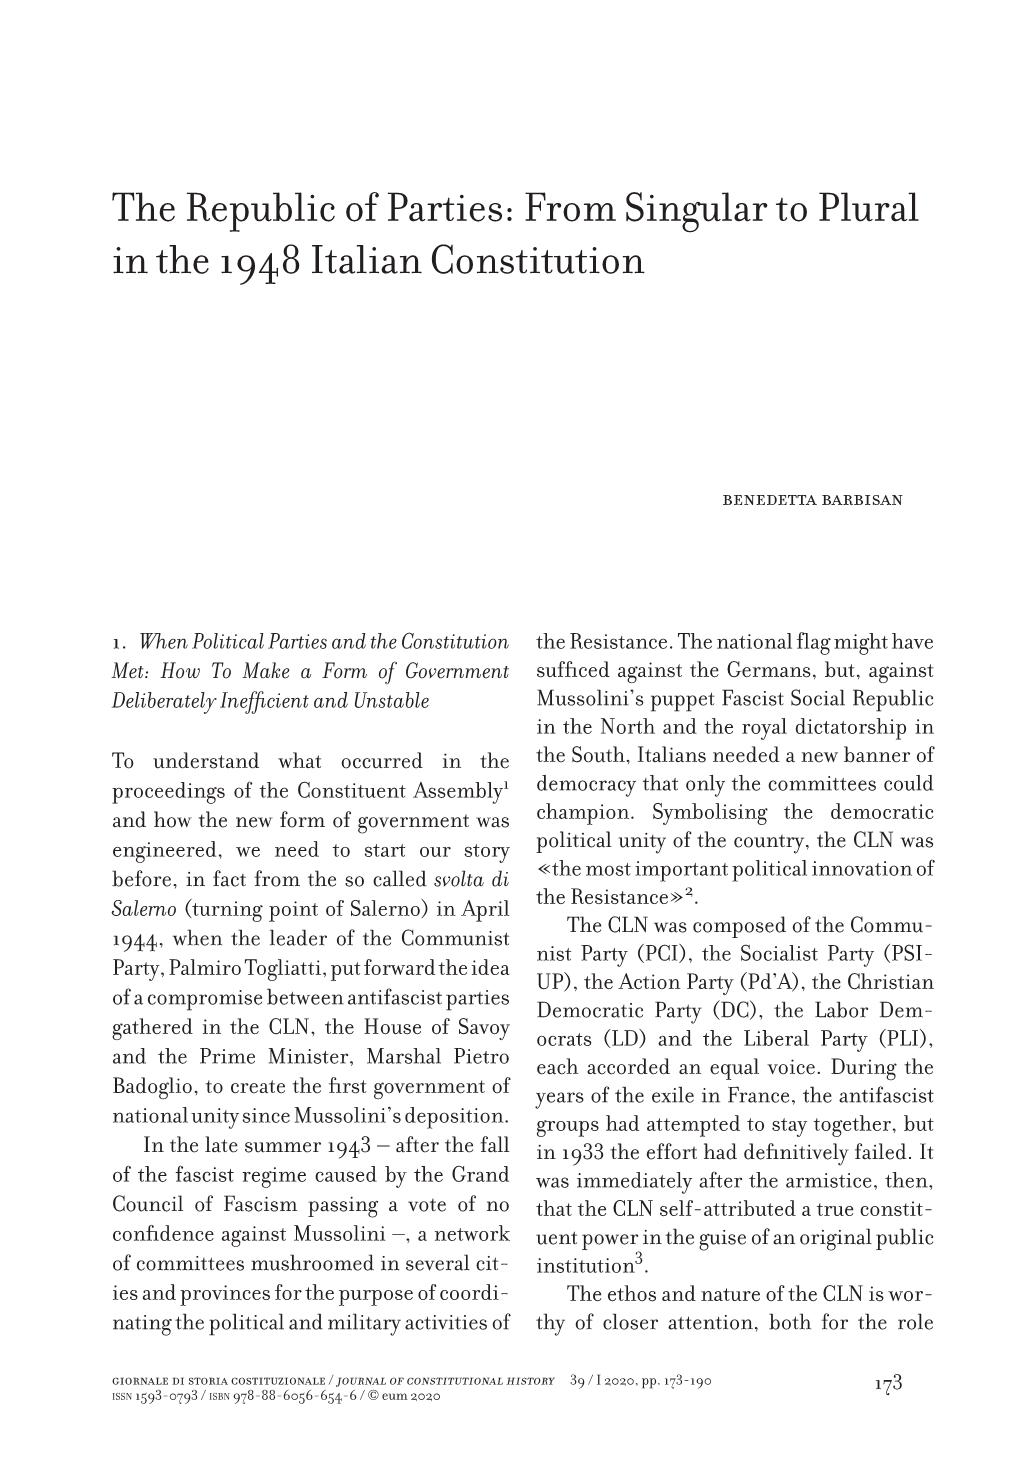 The Republic of Parties: from Singular to Plural in the 1948 Italian Constitution